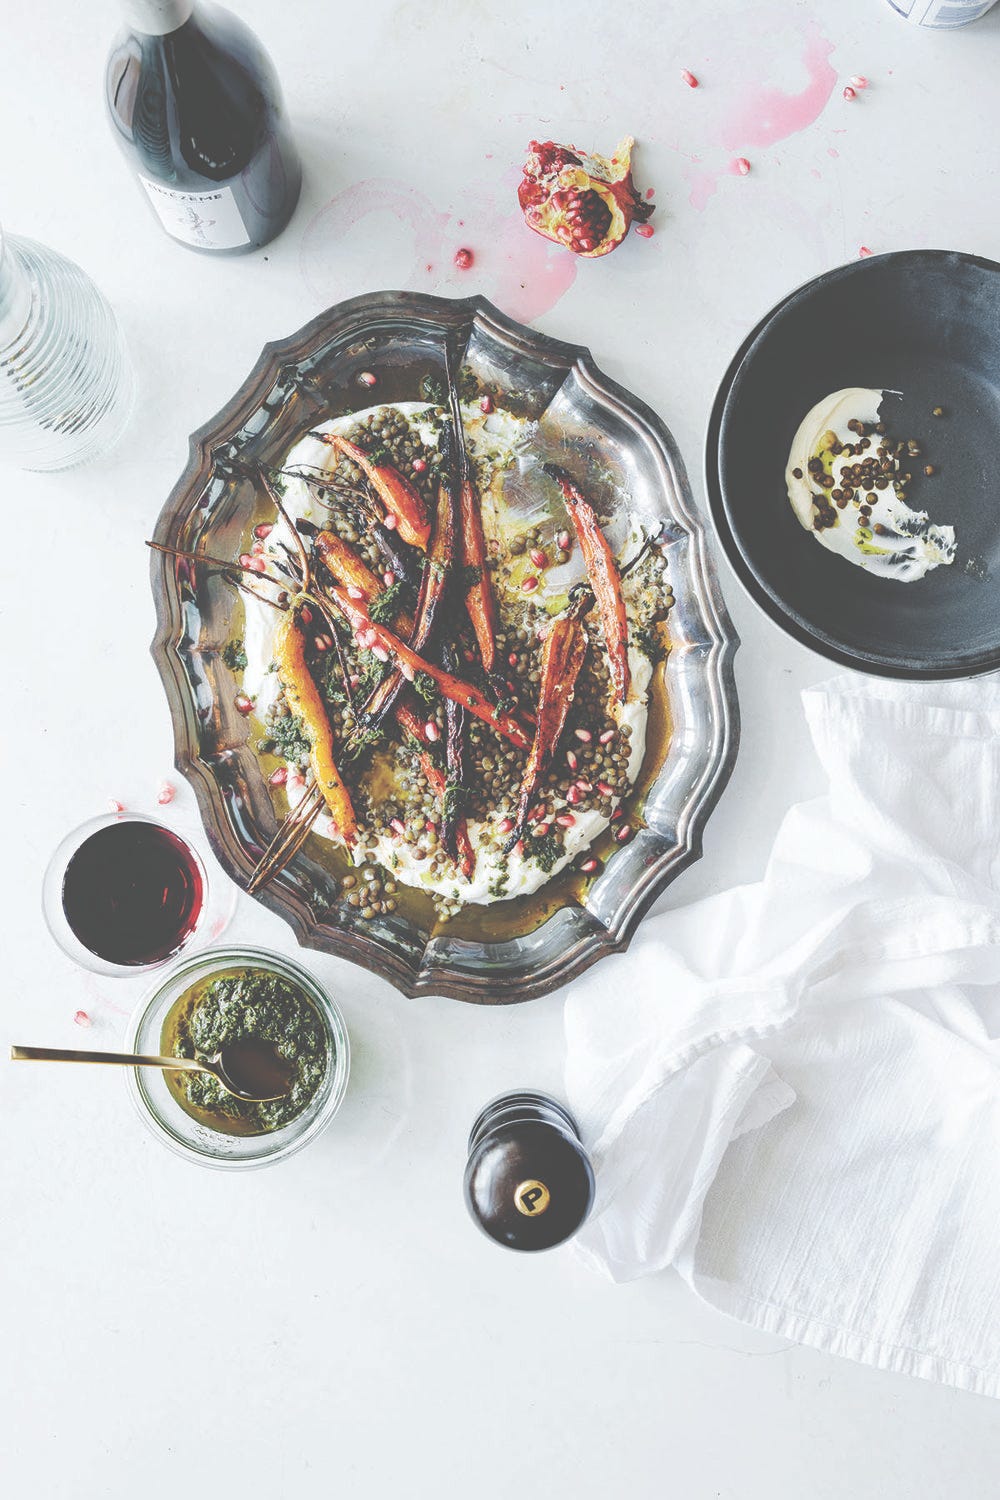 Pomergranate-Roasted Carrots with Lentils, Labneh, and Carrot-Top Zhoug